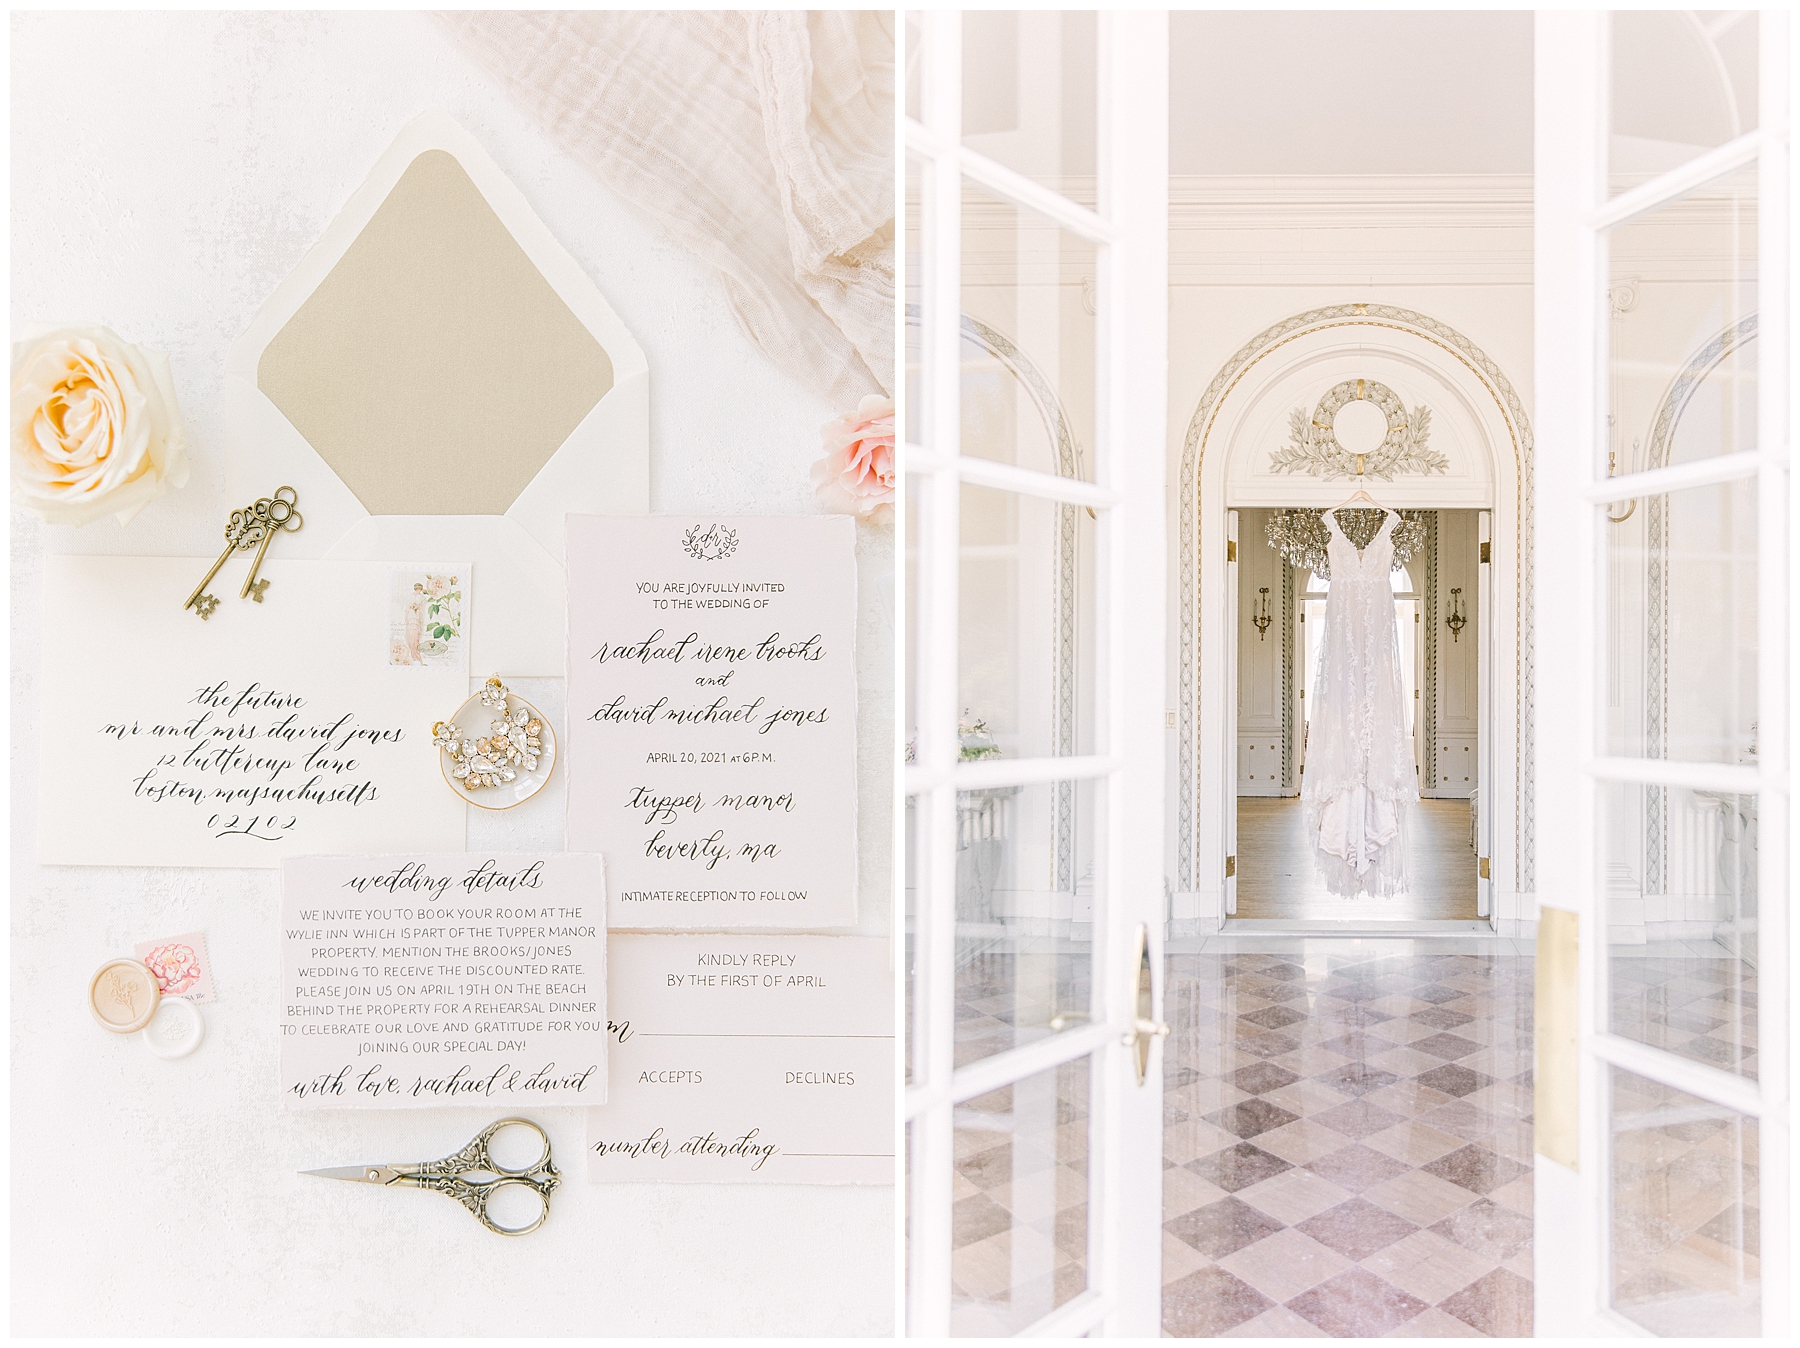 Tupper Manor Wedding Invitations and details